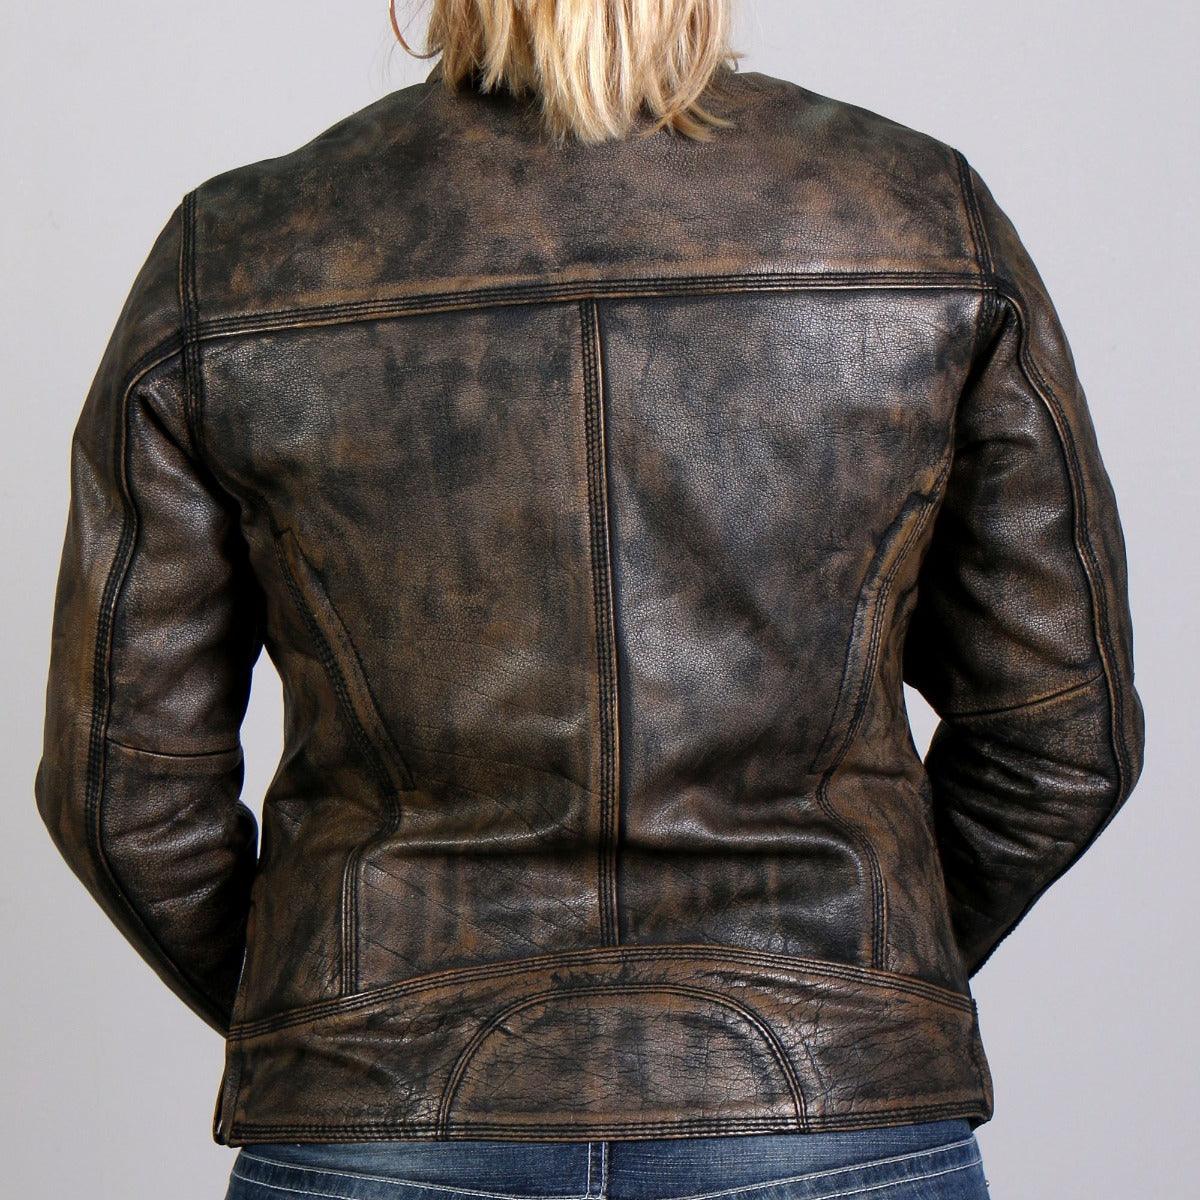 Hot Leathers Heritage Collection Women's Distressed Brown Leather Jacket - American Legend Rider